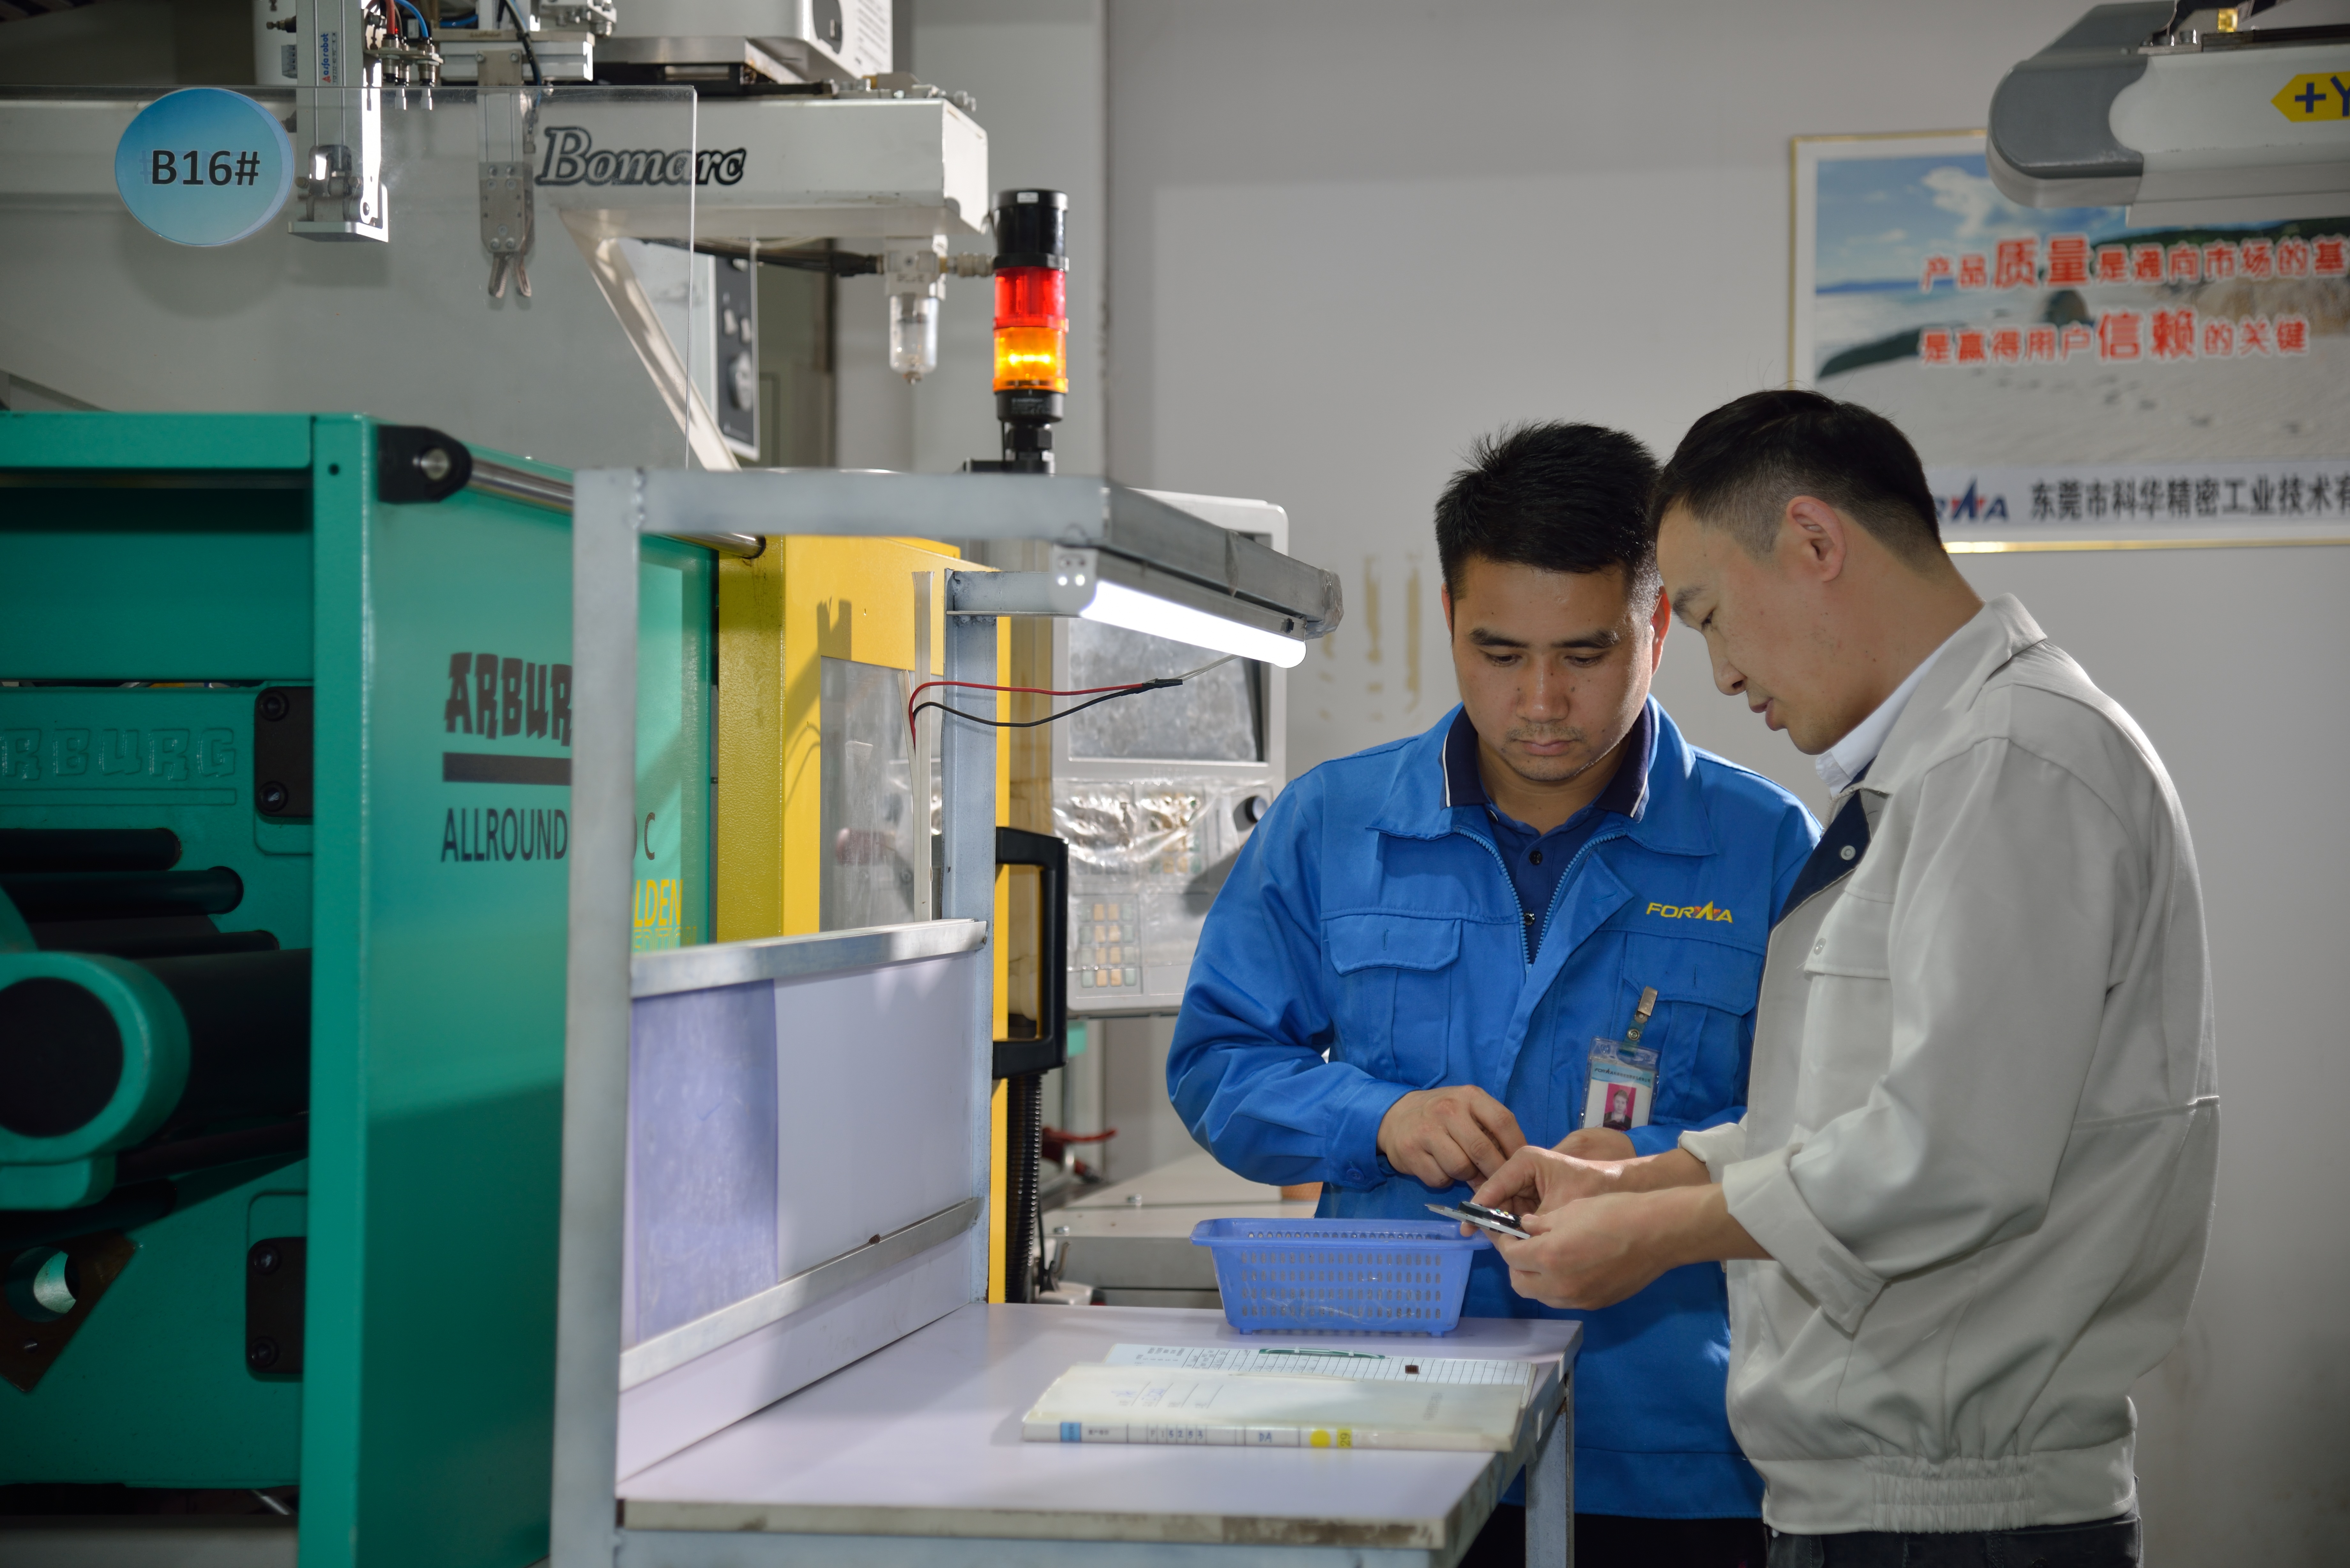 Forwa injection molding factory tells you what temperature related molding parameters